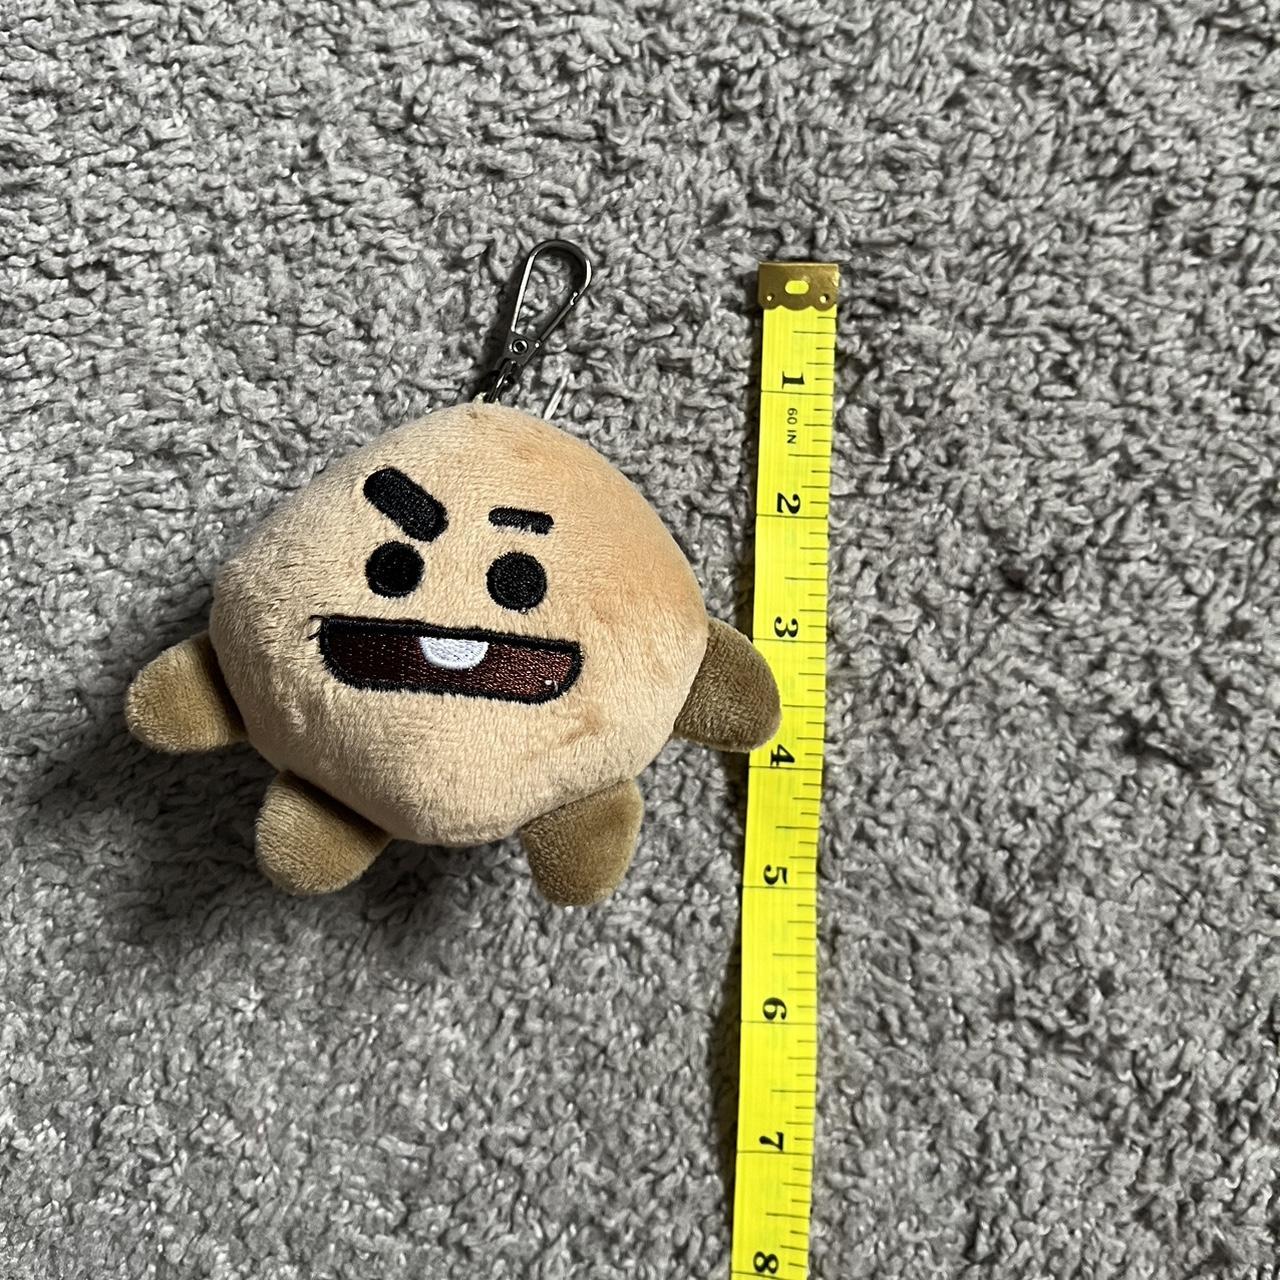 Plushie BT21 shooky key chain Dm me with any - Depop